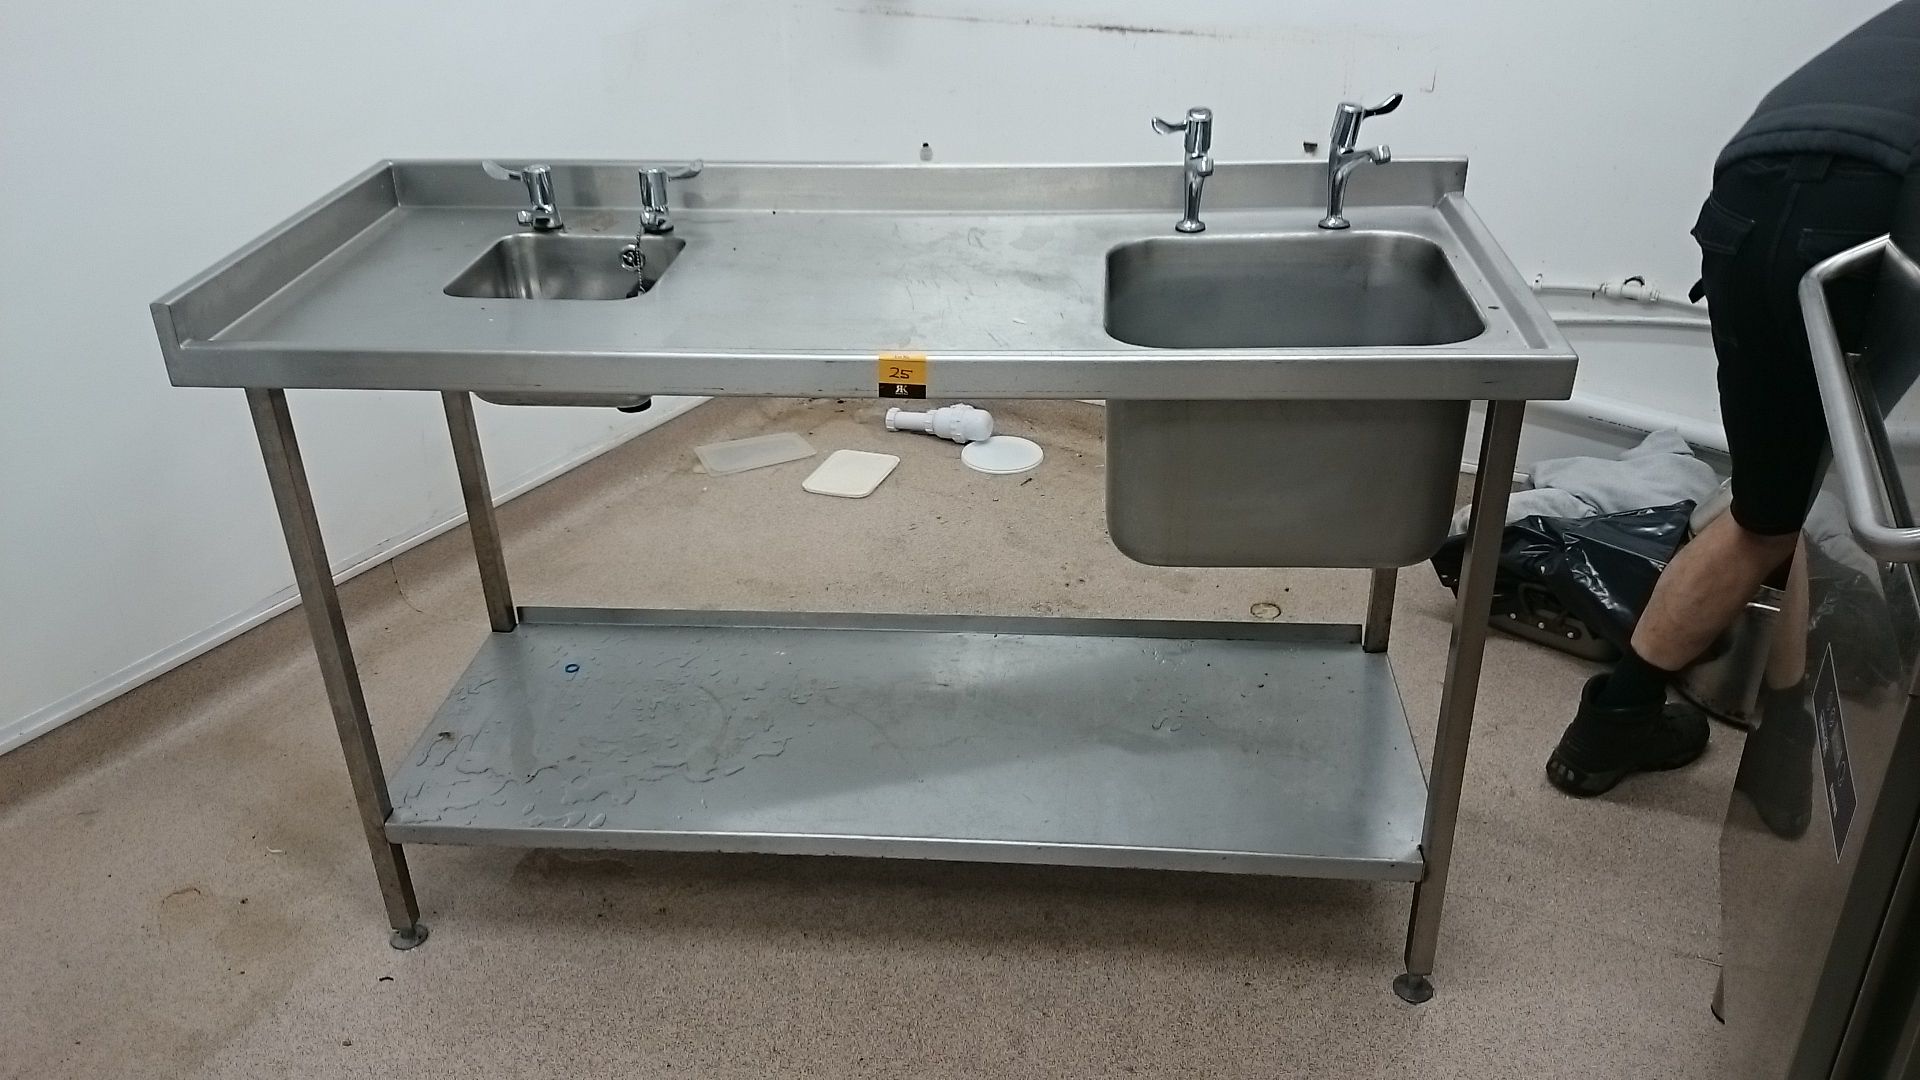 stainless steel sink unit complete with hand wash basin and taps